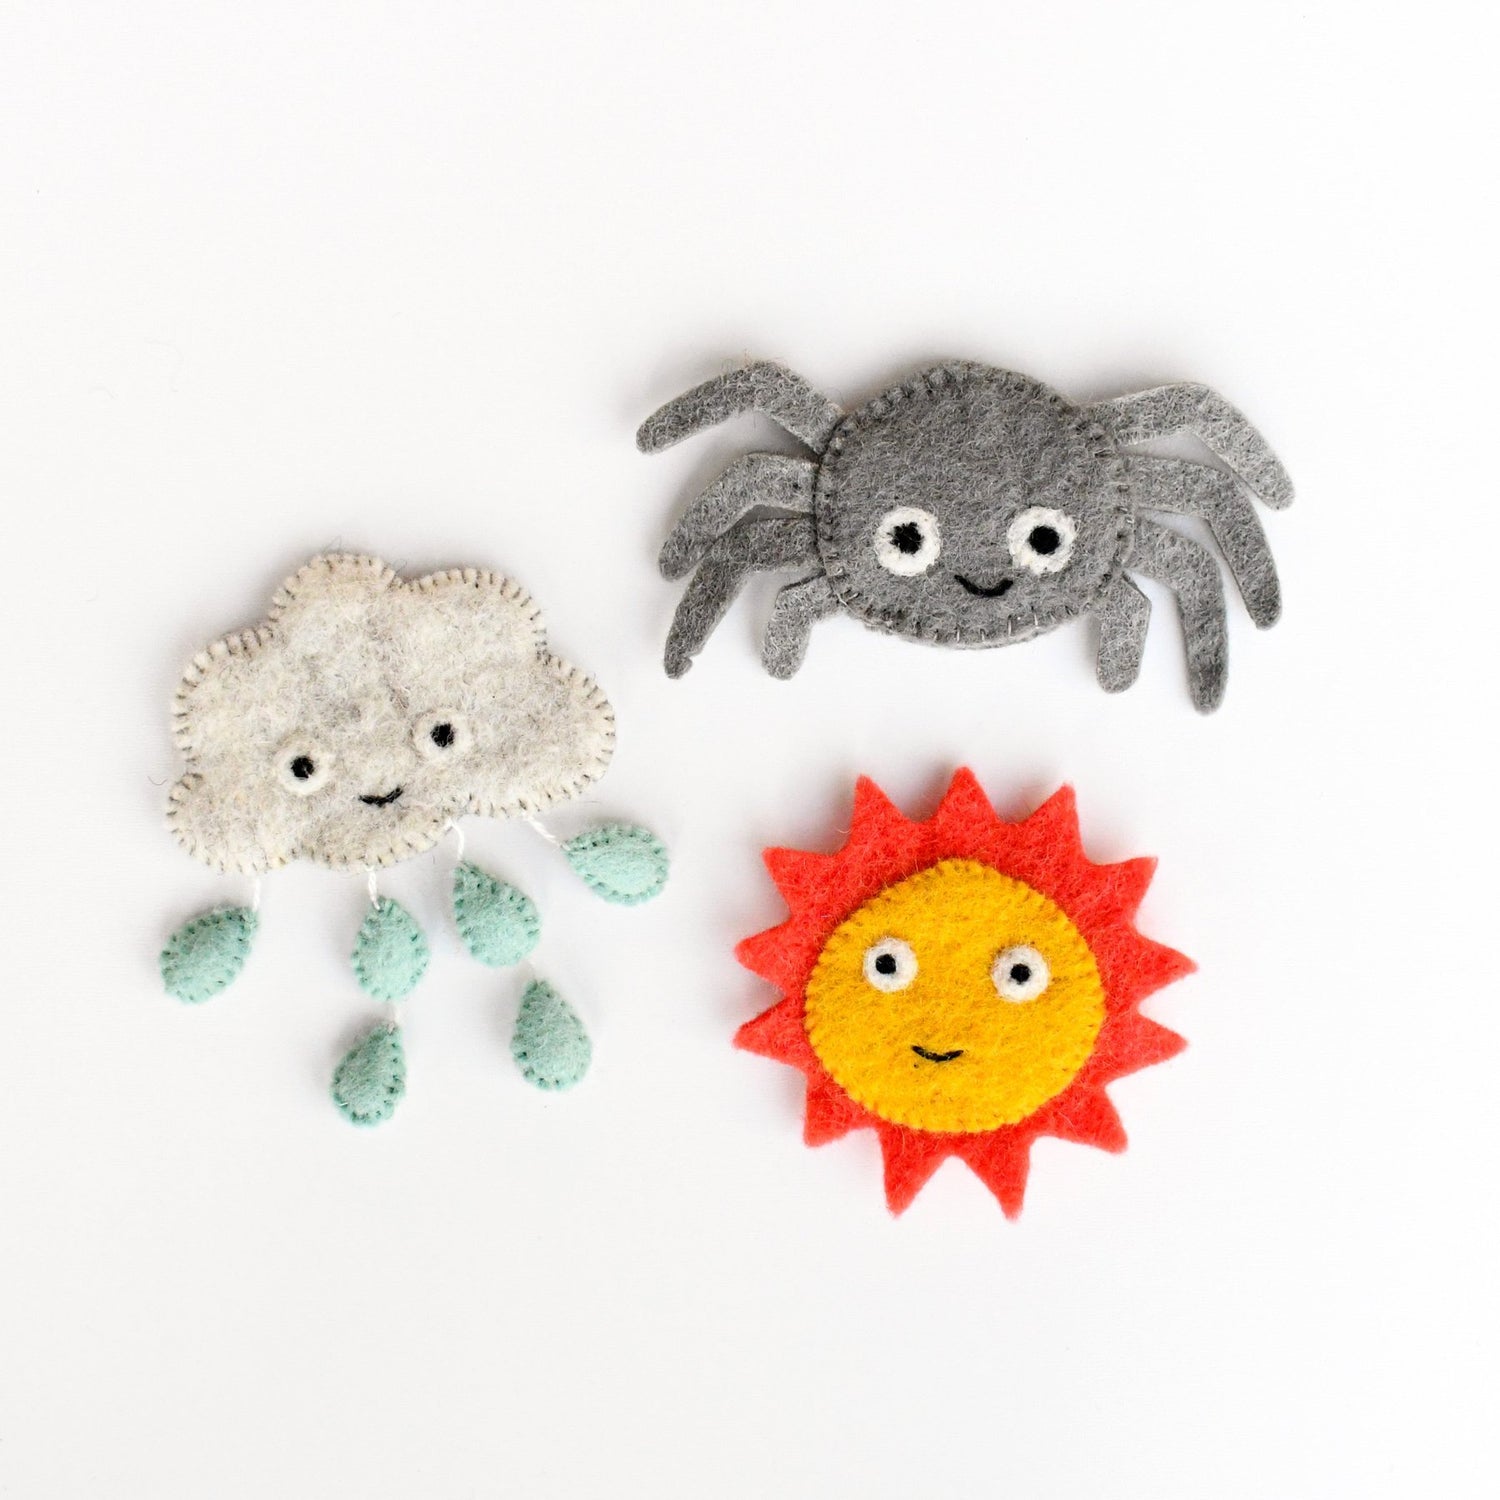 ITSY BITSY SPIDER (INCY WINCY SPIDER) FINGER PUPPET SET by TARA TREASURES - The Playful Collective